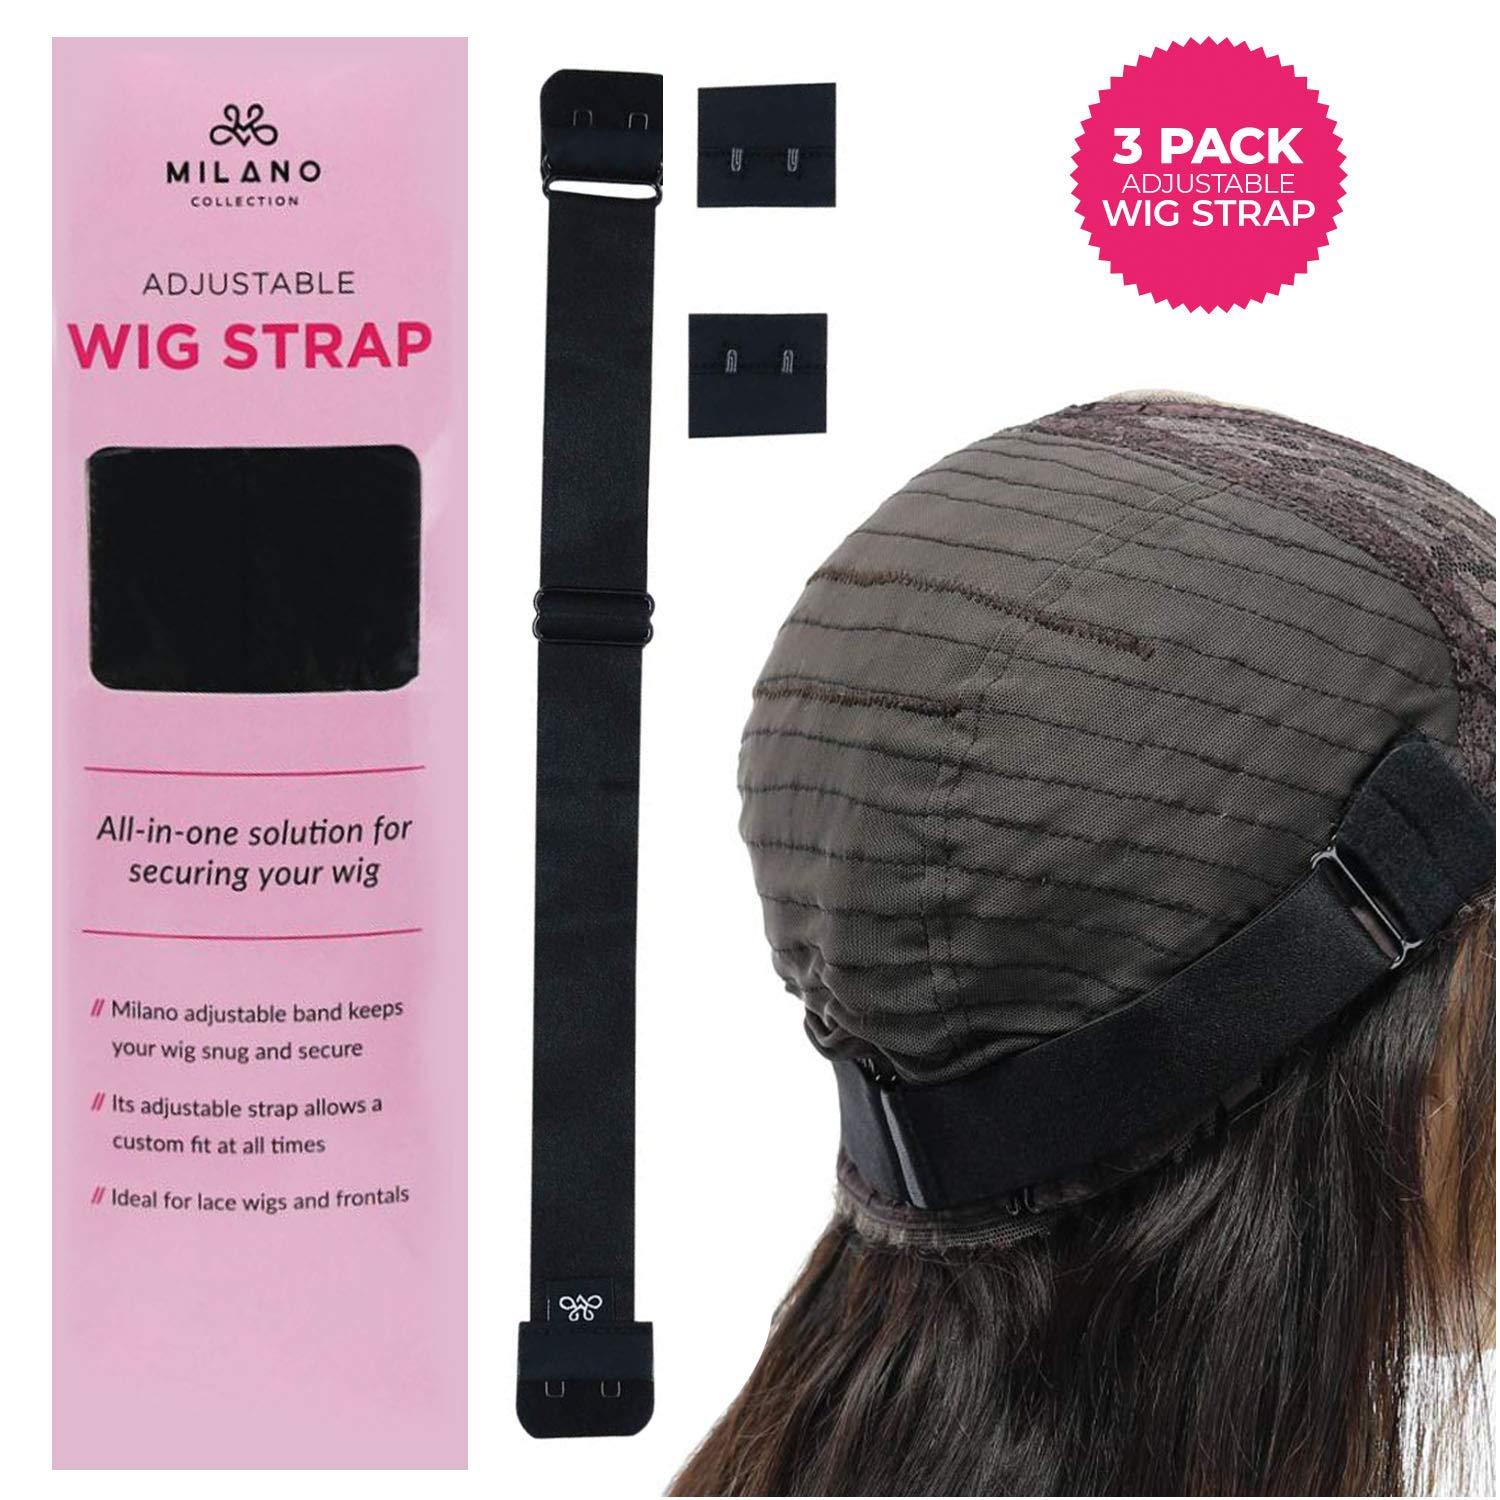 Adjustable Elastic Band for Wig installation, Shop Today. Get it Tomorrow!